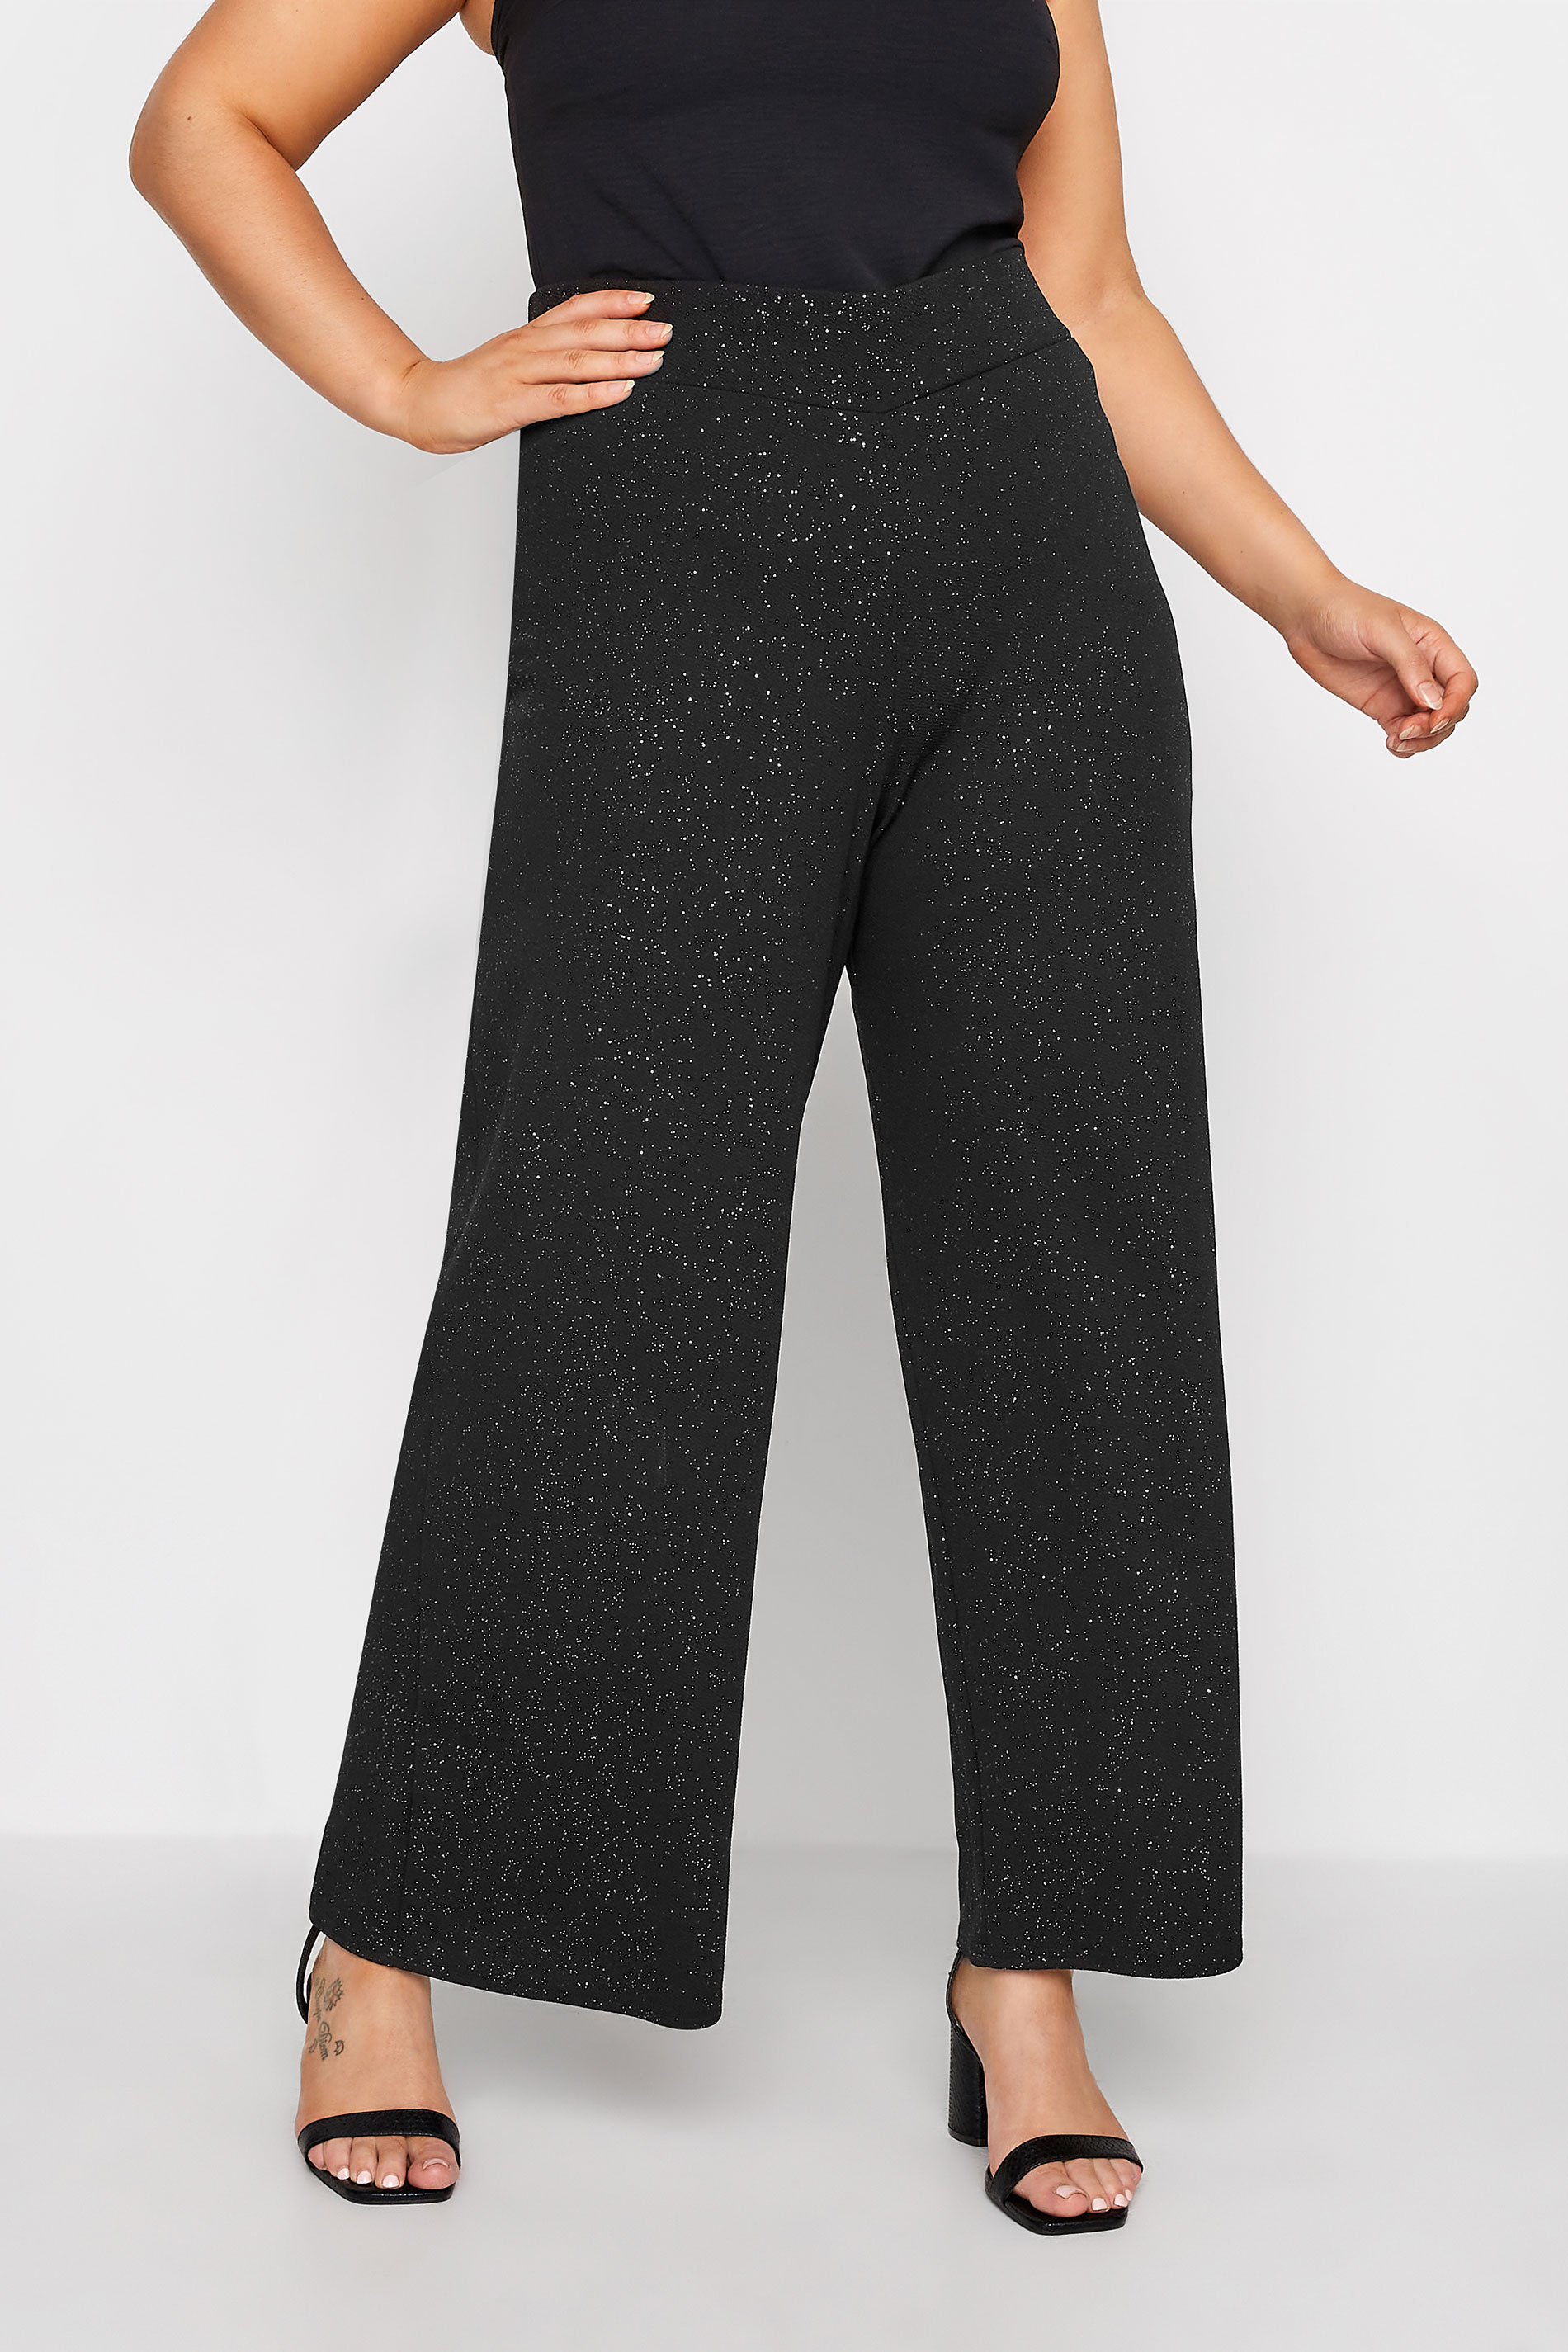 YOURS LONDON Plus Size Black Glitter Stretch Wide Leg Trousers | Yours Clothing 1